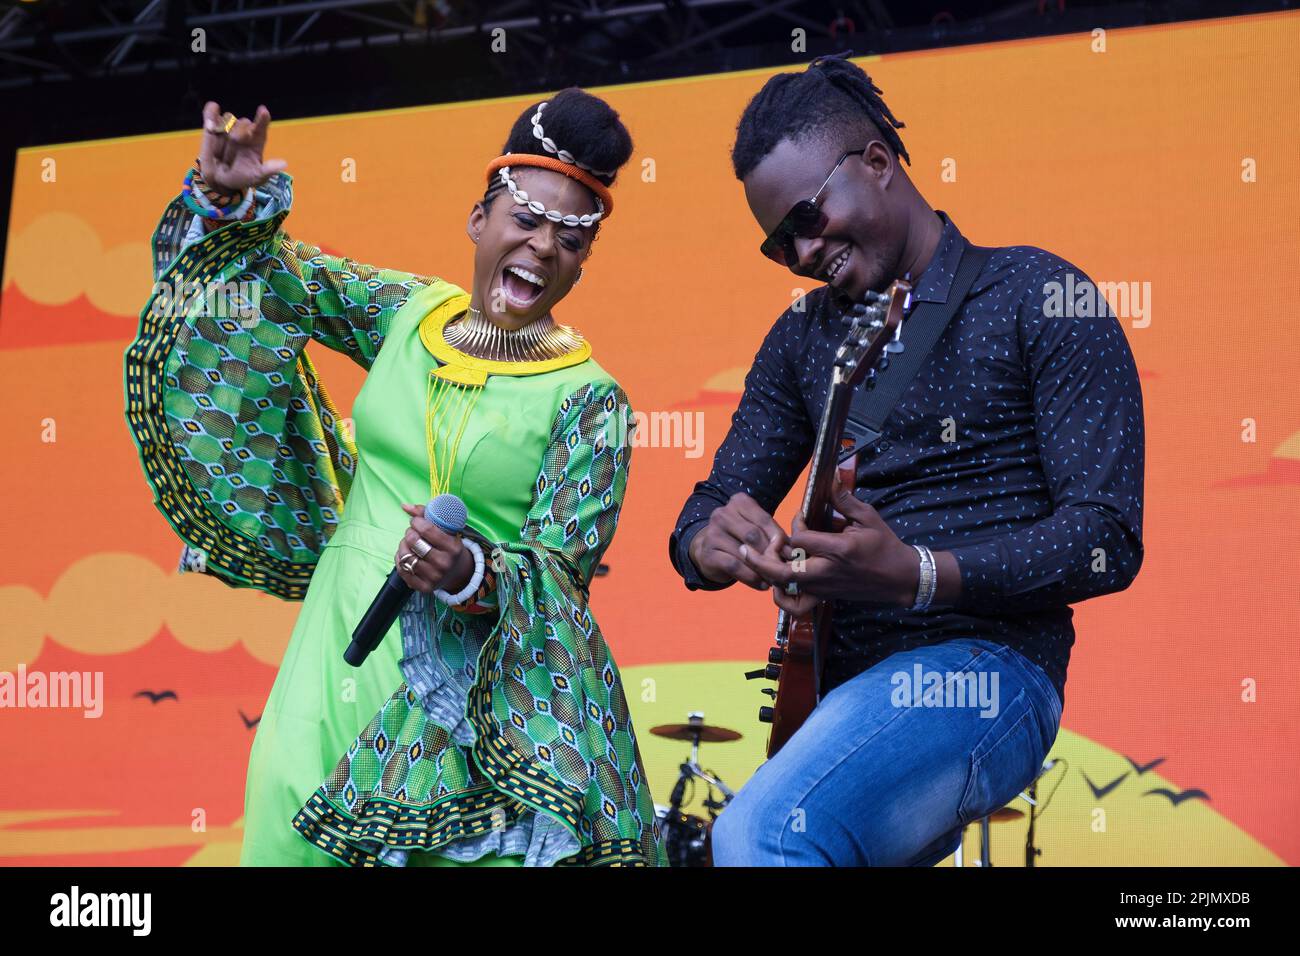 Les Amazones D'Afrique perform at the 40th Anniversary of the WOMAD Festival, Charlton Park, Malmesbury, England. July 30, 2022 Stock Photo